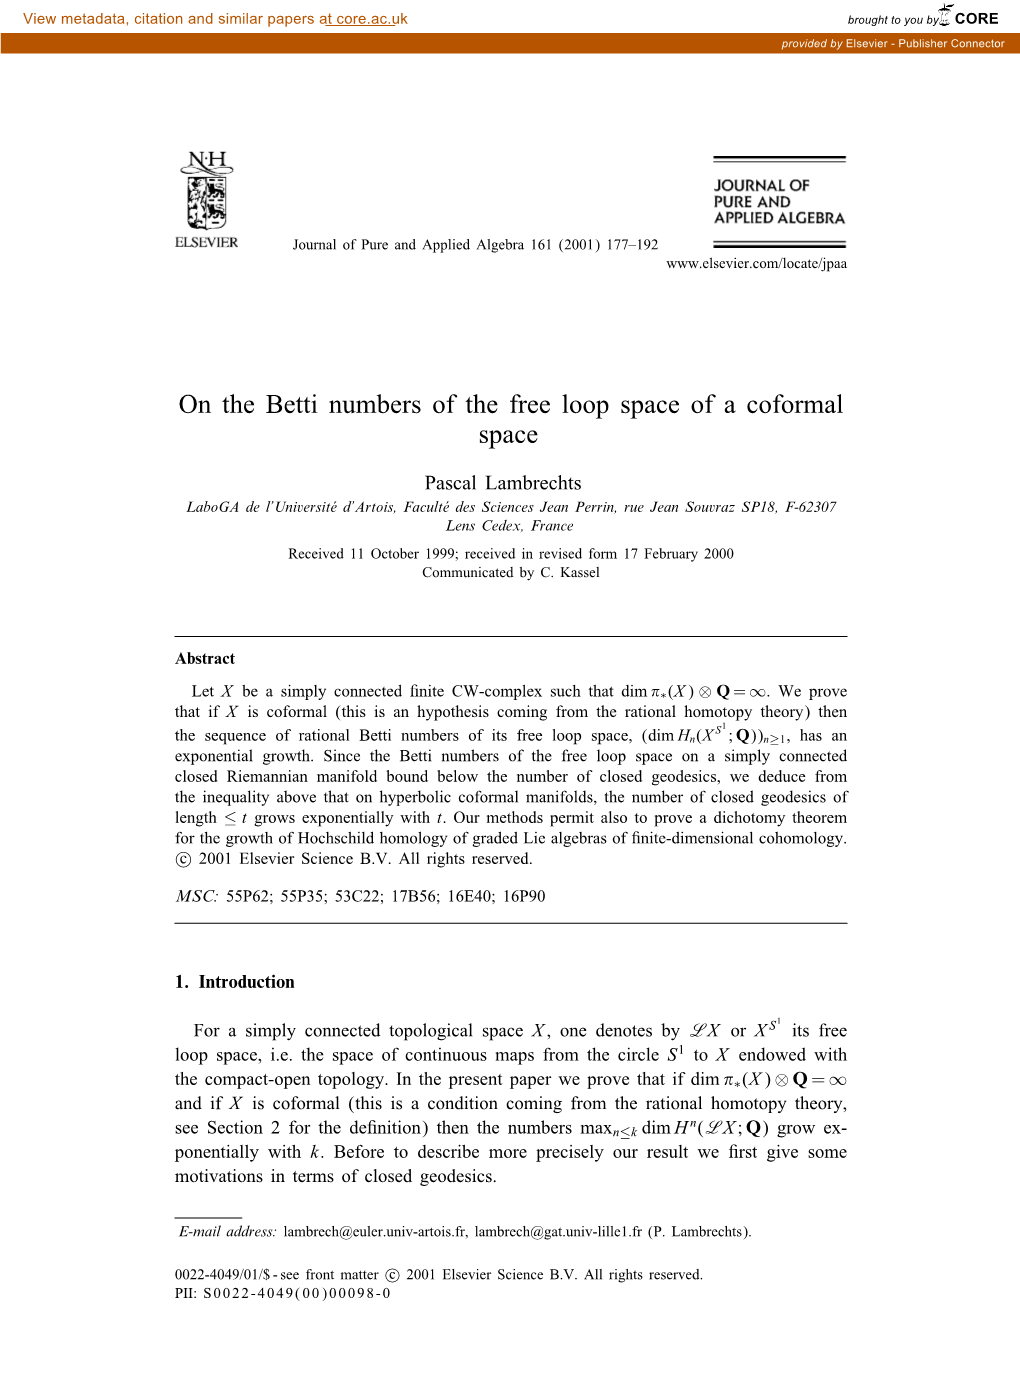 On the Betti Numbers of the Free Loop Space of a Coformal Space